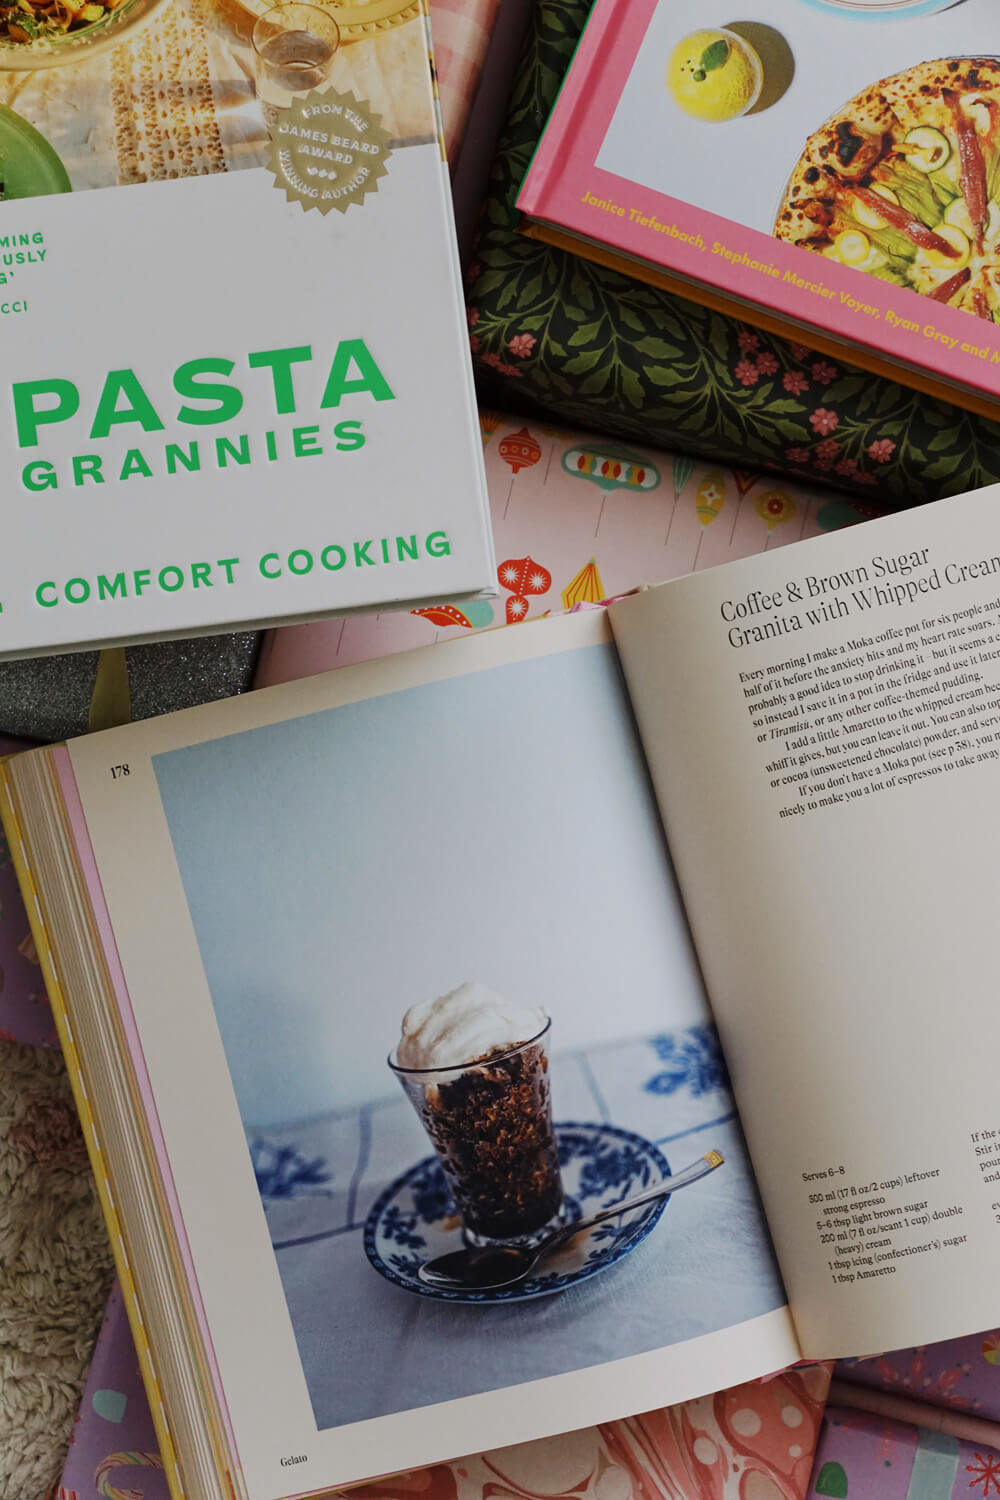 christmas gift ideas with wallflower - la dolce vita book and pasta grannies